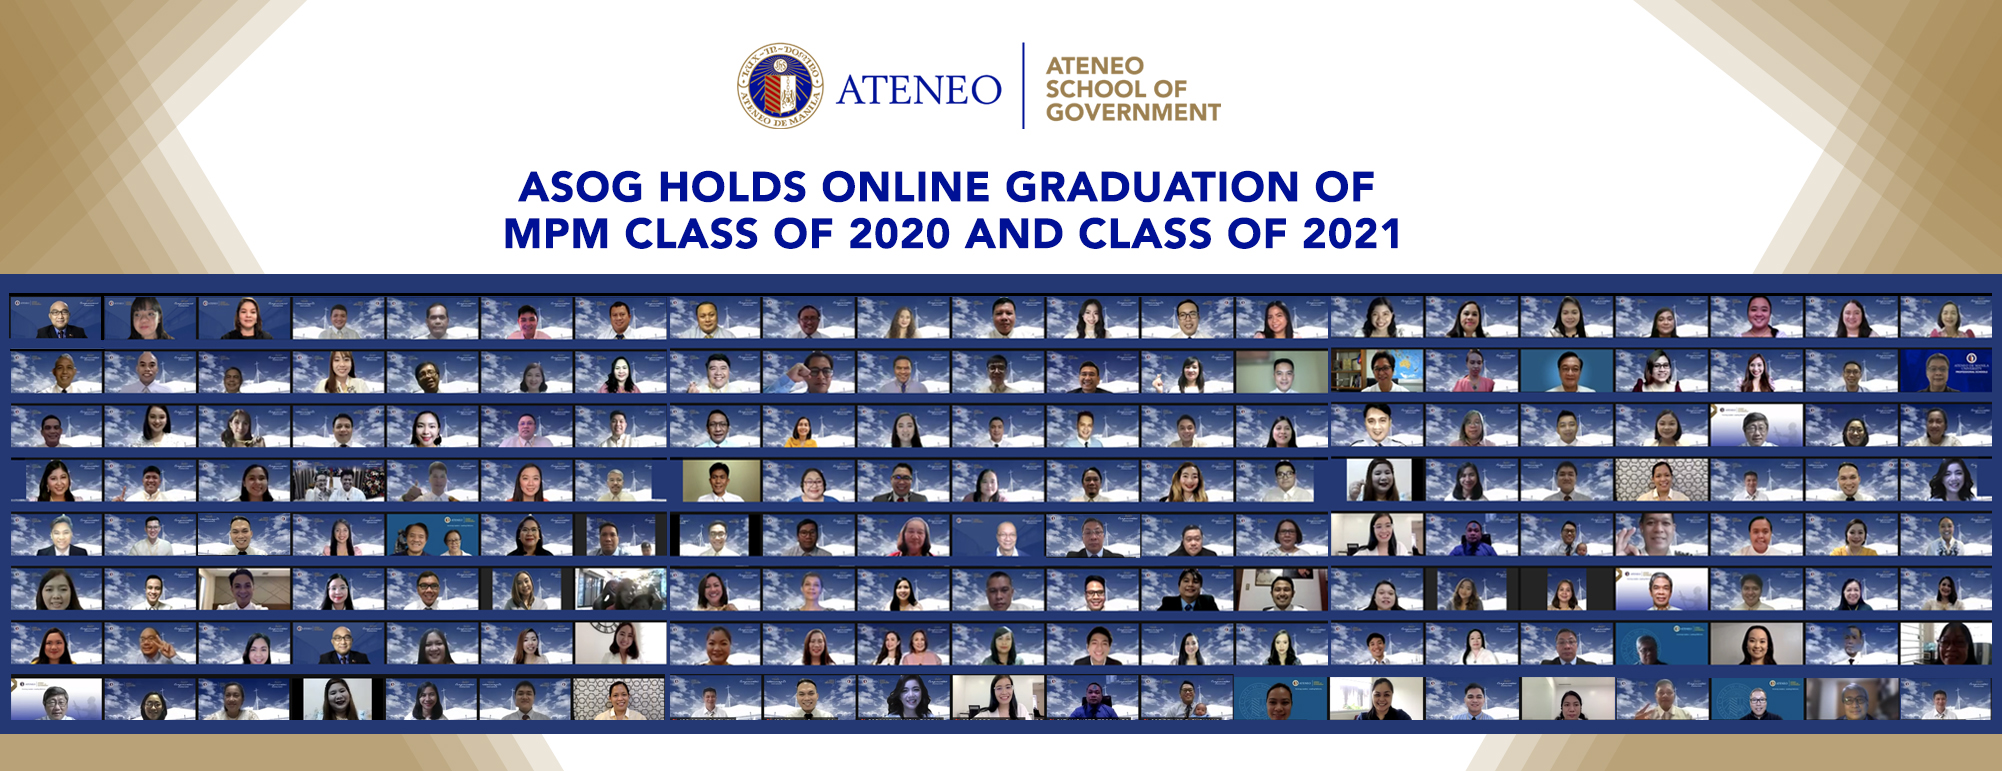 ASOG holds online graduation of MPM Class of 2020 and Class of 2021